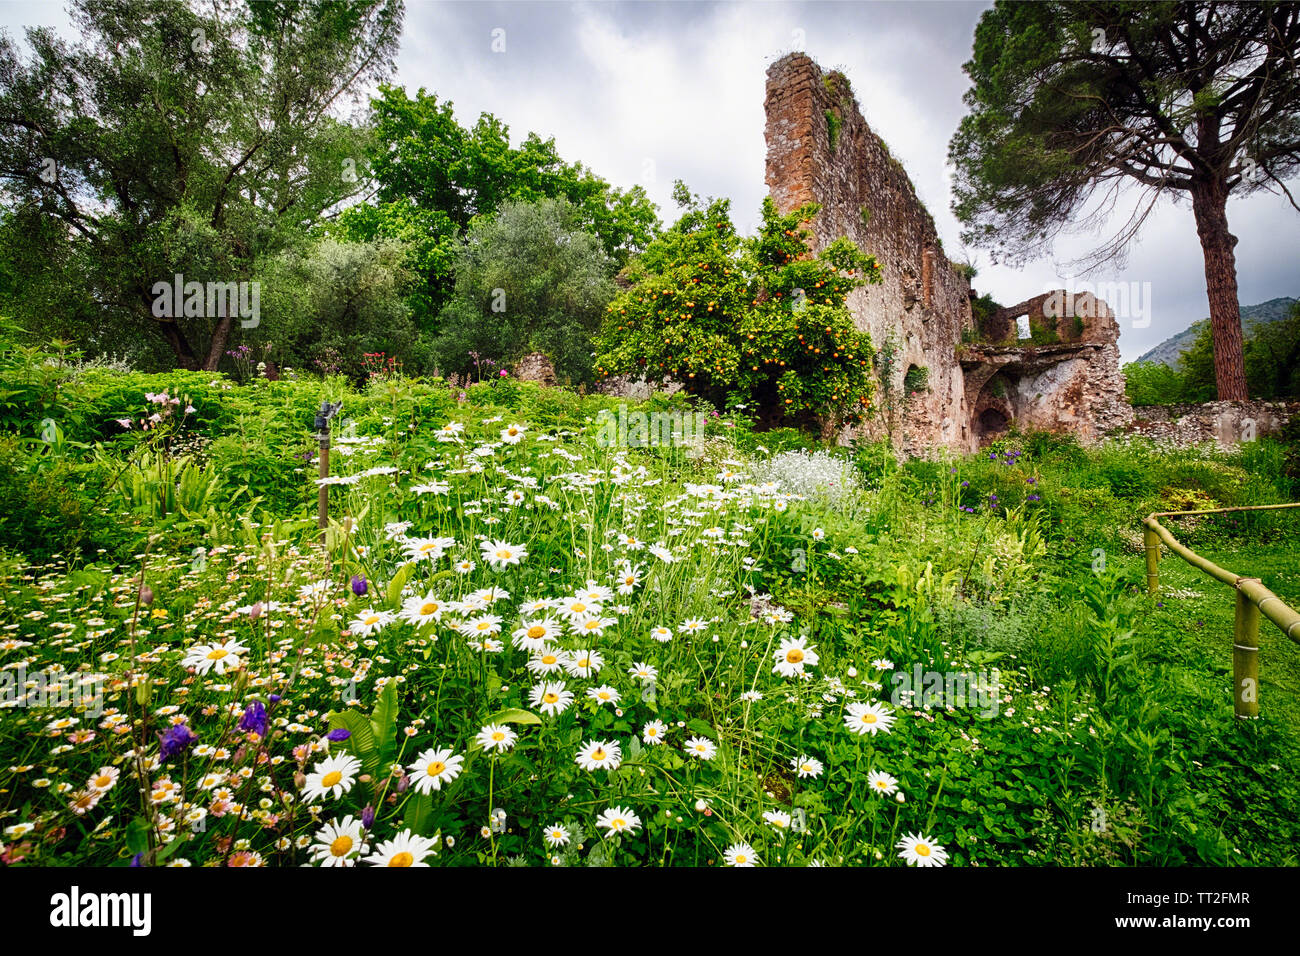 Ruins in a Garden with Flowers and Orange Tree, Garden of Ninfa, Cisterna di Latina, Italy Stock Photo